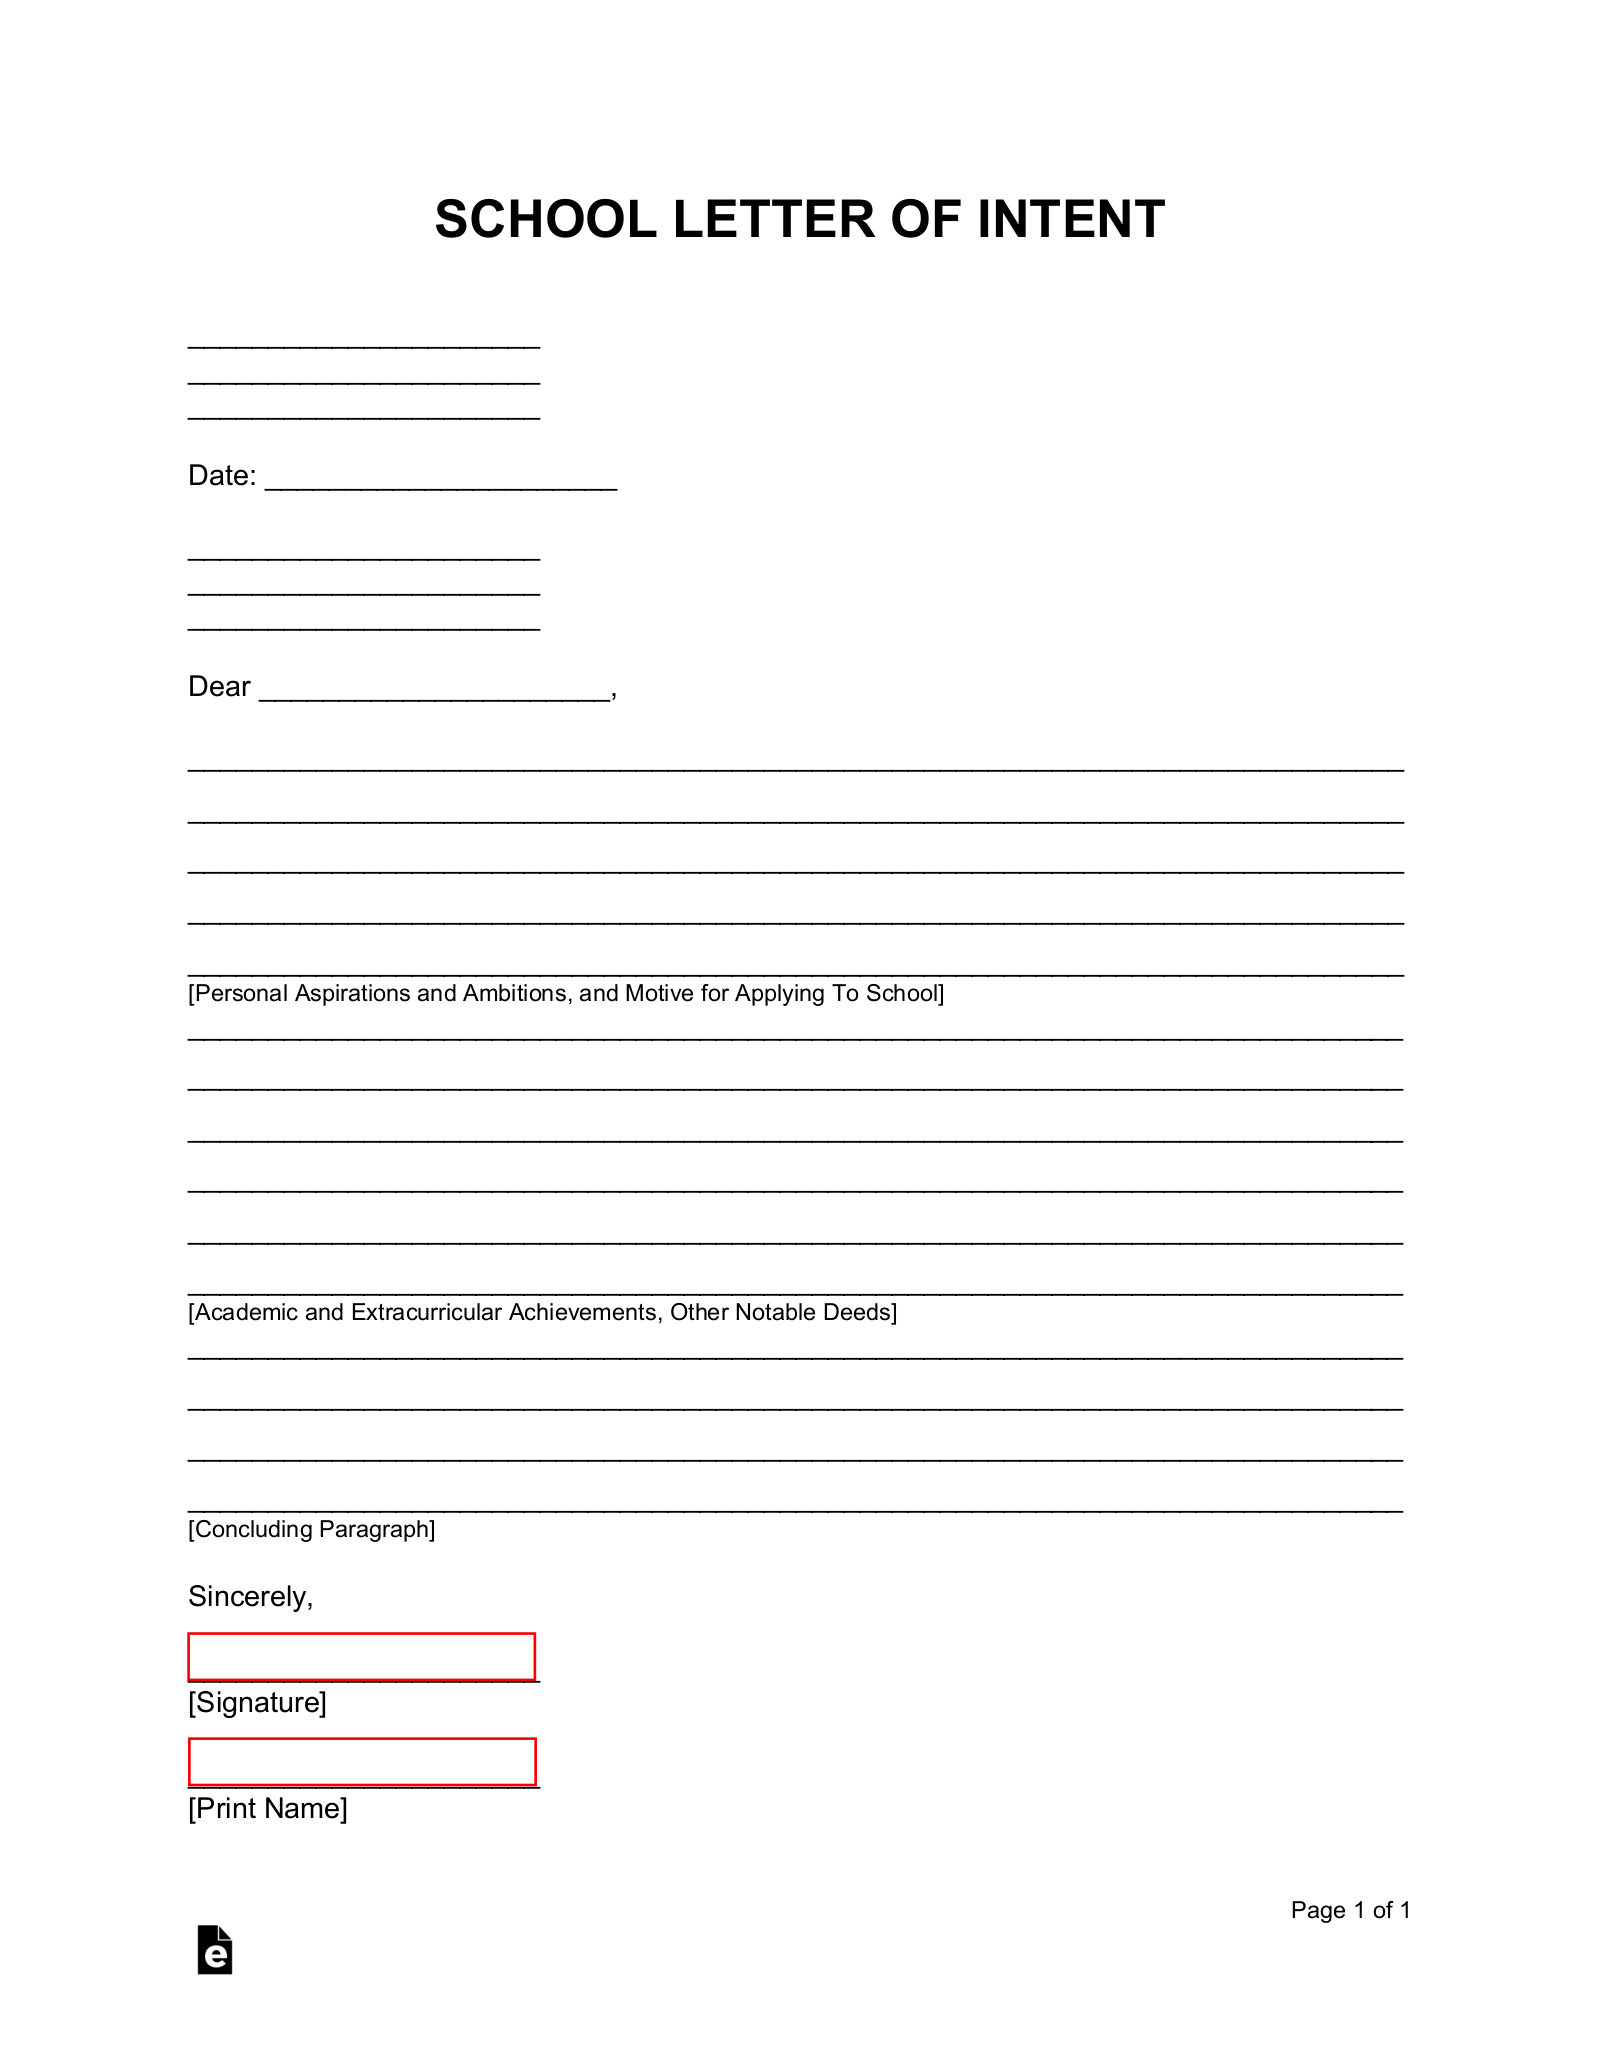 Free School Letter of Intent - Word  PDF – eForms